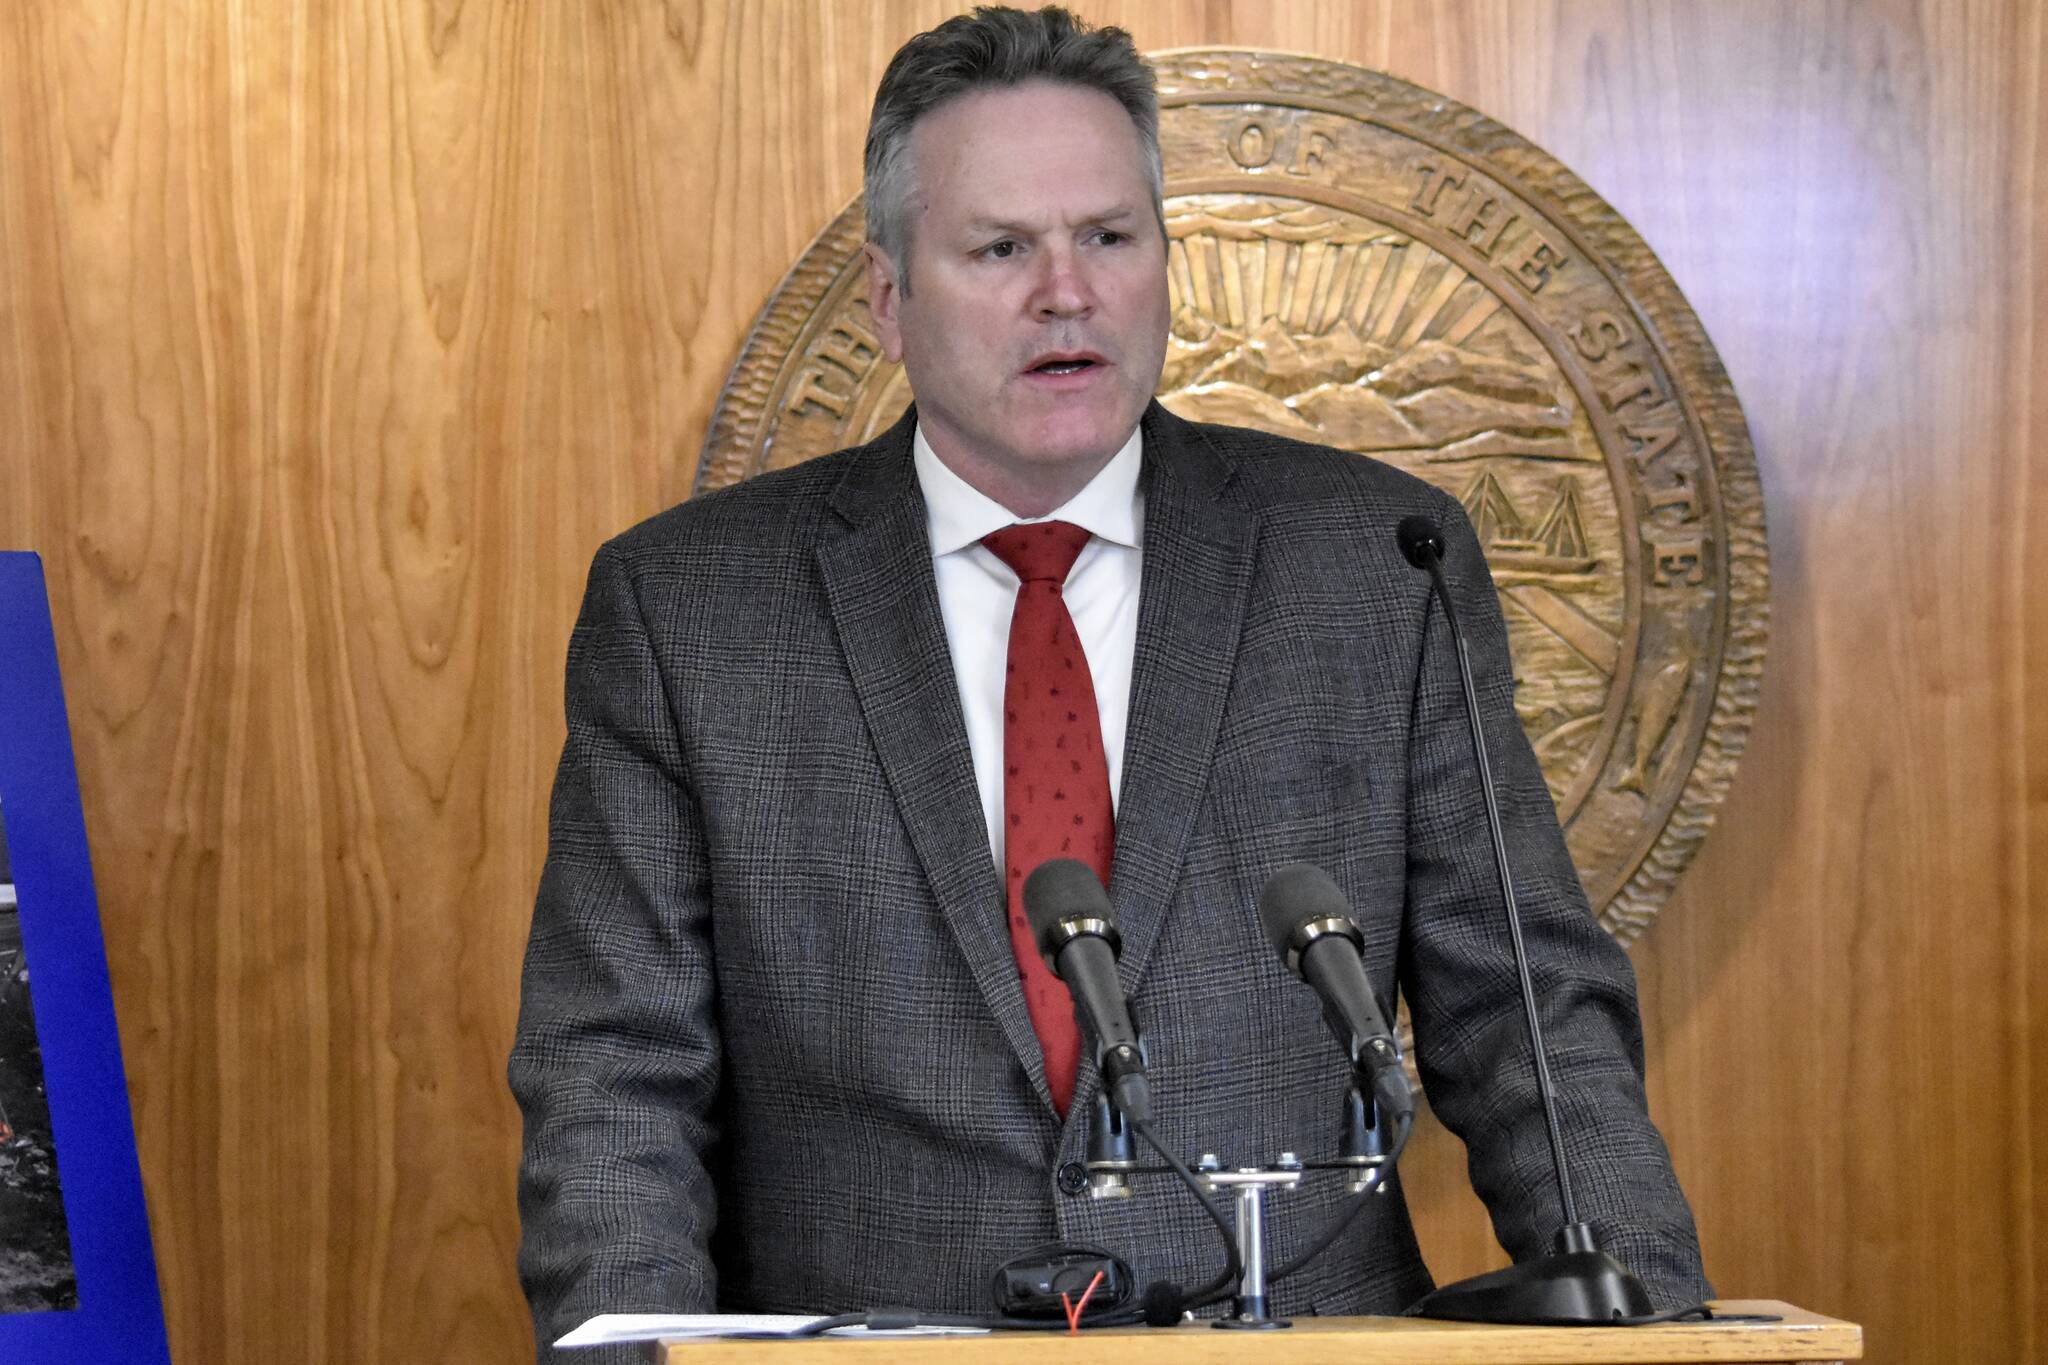 Gov. Mike Dunleavy speaks at a March 8, news conference at the Alaska State Capitol. On Tuesday, Dunleavy released the state's updated revenue forecast and called for Permanent Fund Dividend payments of $3,700. (Peter Segall / Juneau Empire file)